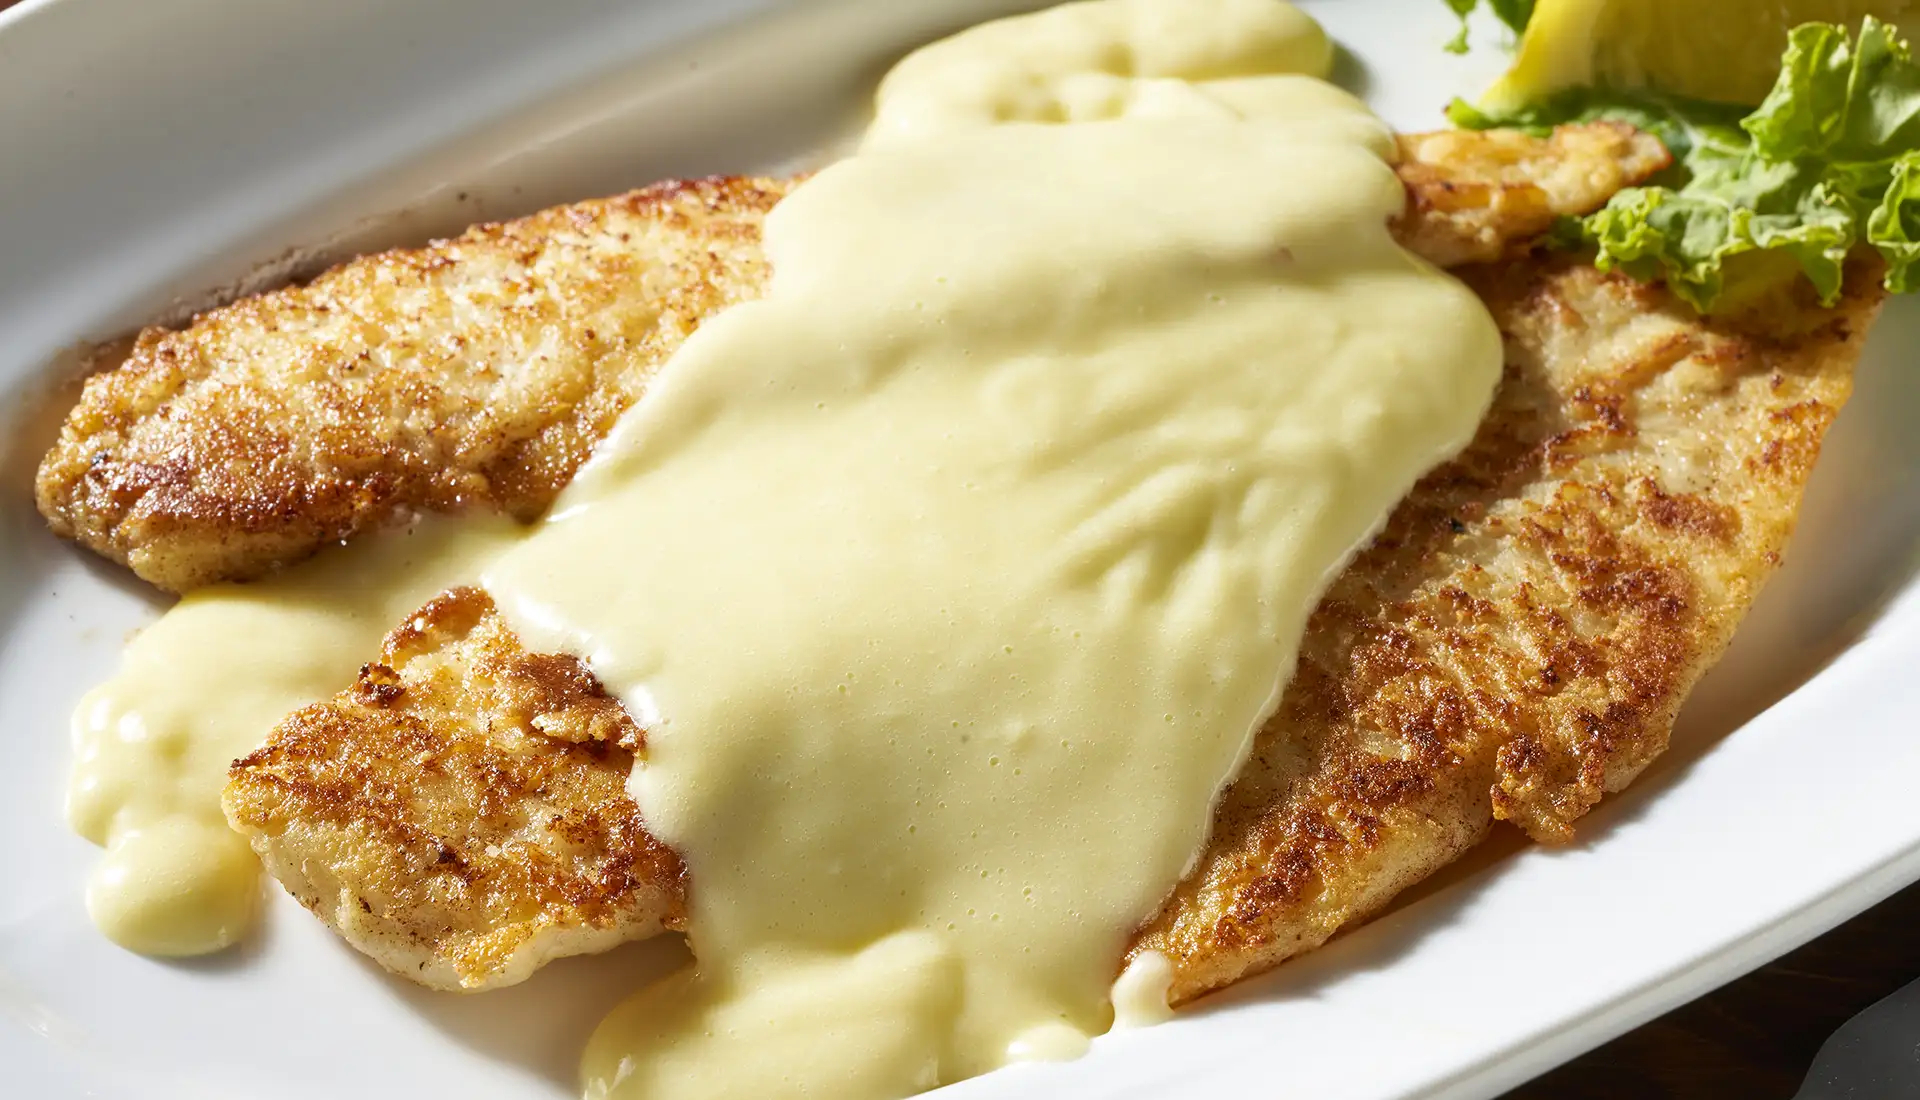 A lightly breaded flounder filet sautéed and served in a lemon-butter sauce with two sides.